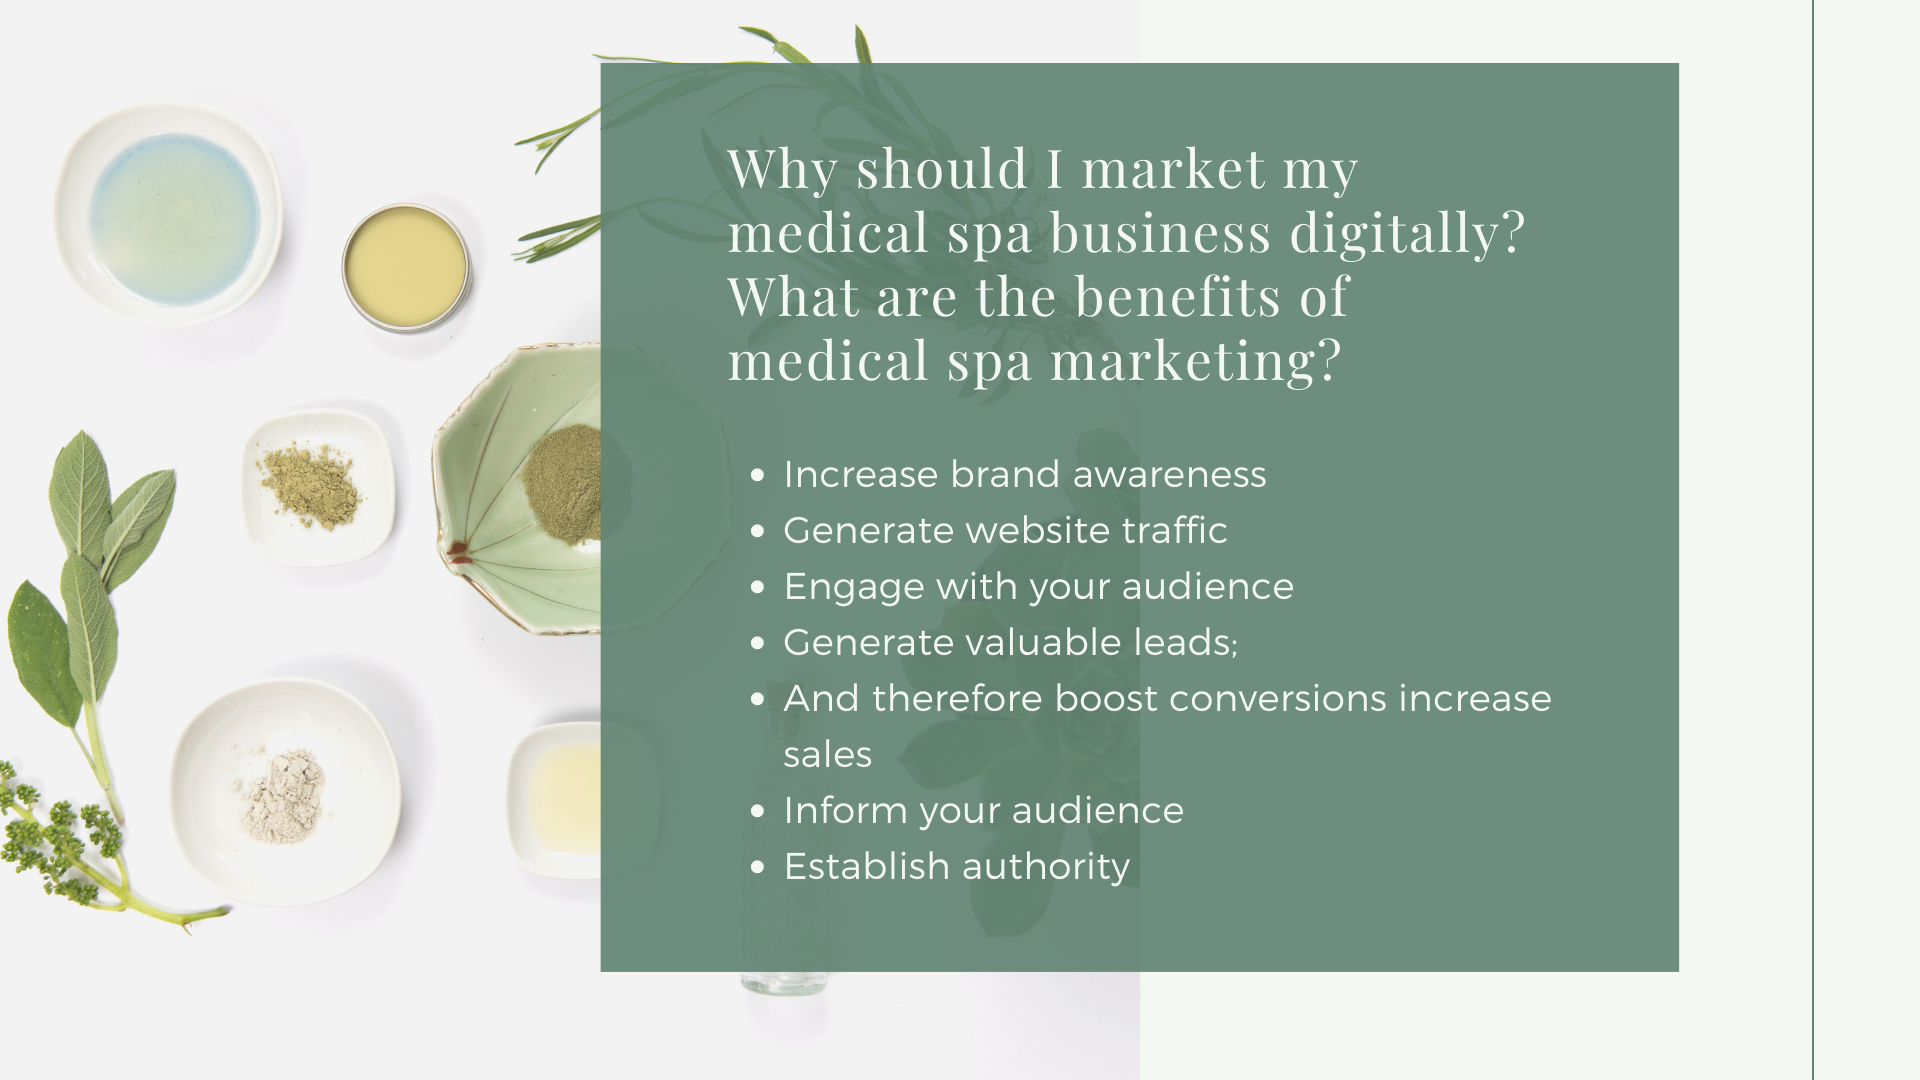 What are the benefits of medical spa marketing